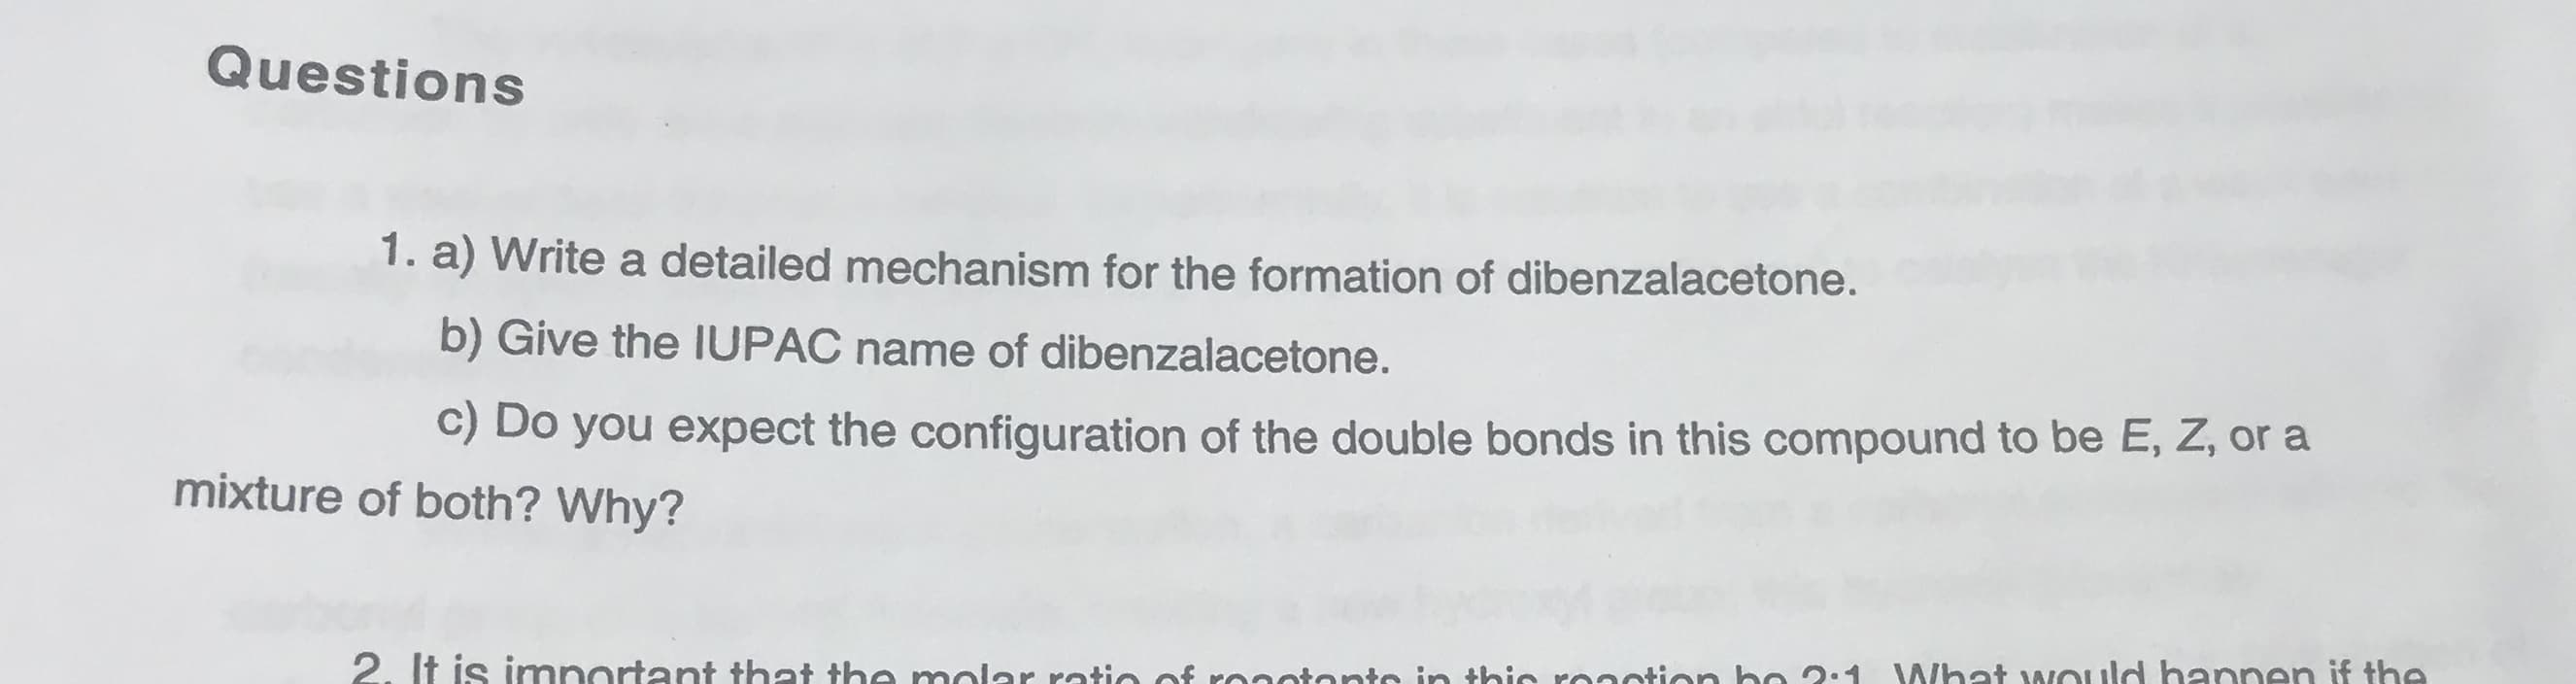 Questions
1. a) Write a detailed mechanism for the formation of dibenzalacetone.
b) Give the IUPAC name of dibenzalacetone.
C) Do you expect the configuration of the double bonds in this compound to be E, Z, or a
mixture of both? Why?
It is imnartant that the molar rotio af ronntonto in thin roantion bo 2:1 What would hannen if the.
